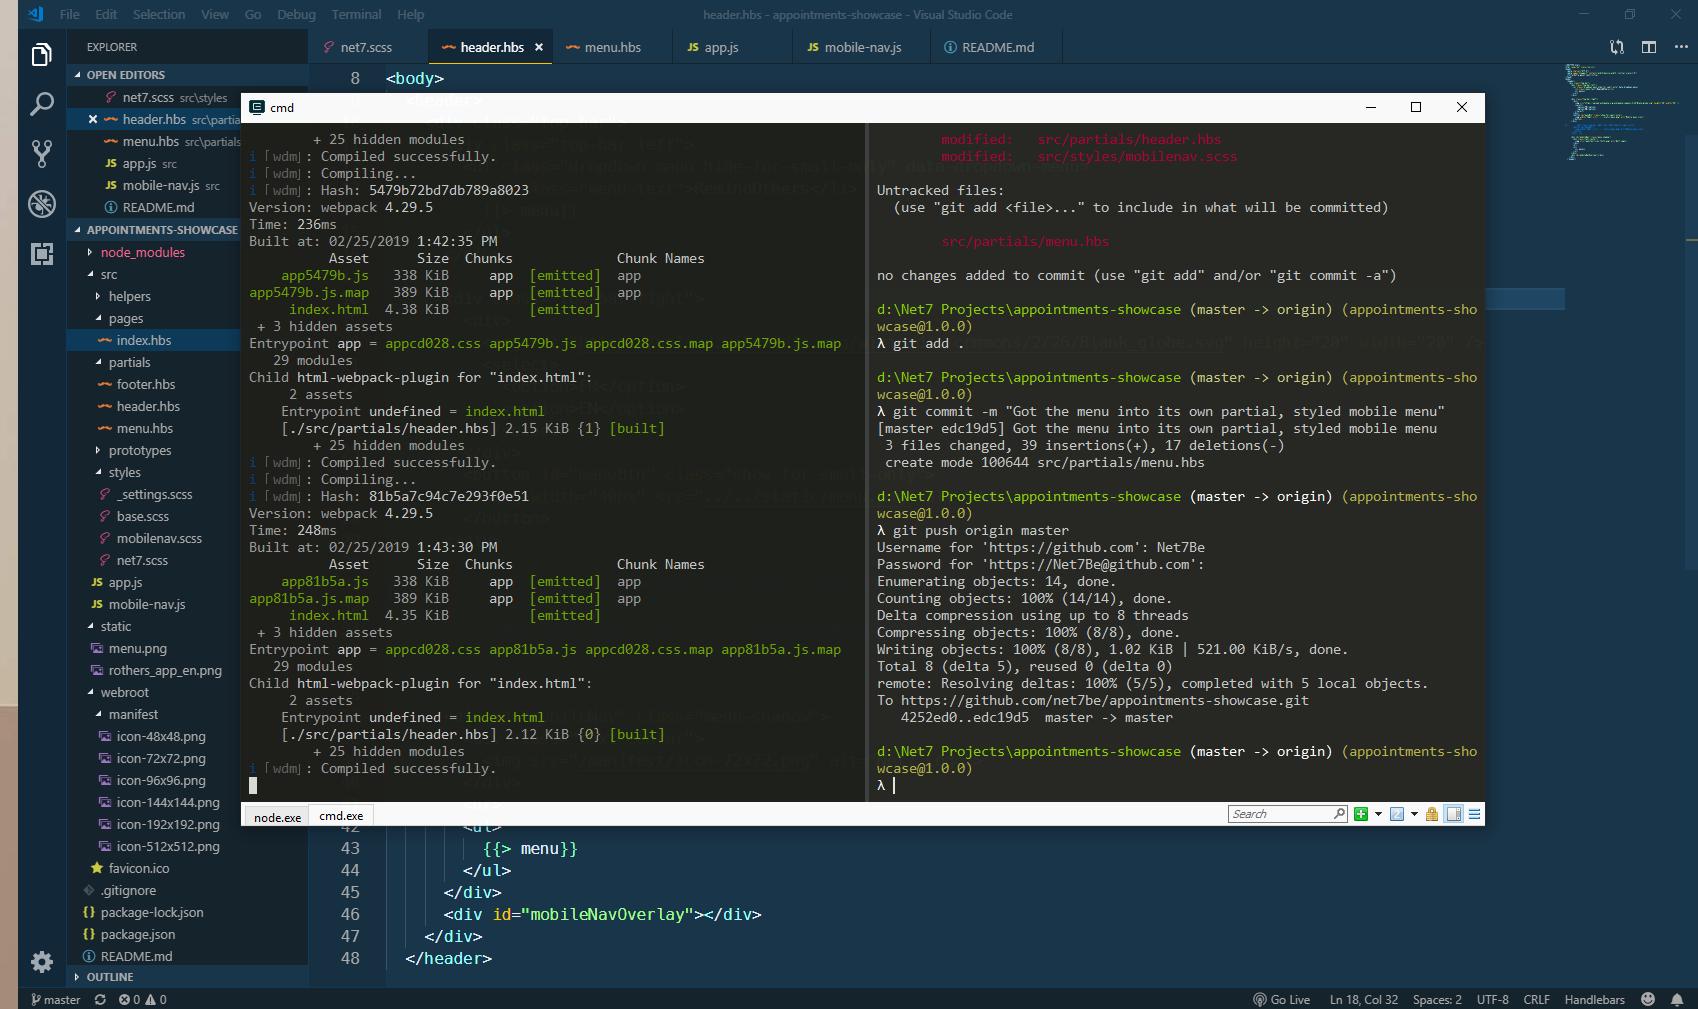 The terminal emulator Cmder, with split console tabs